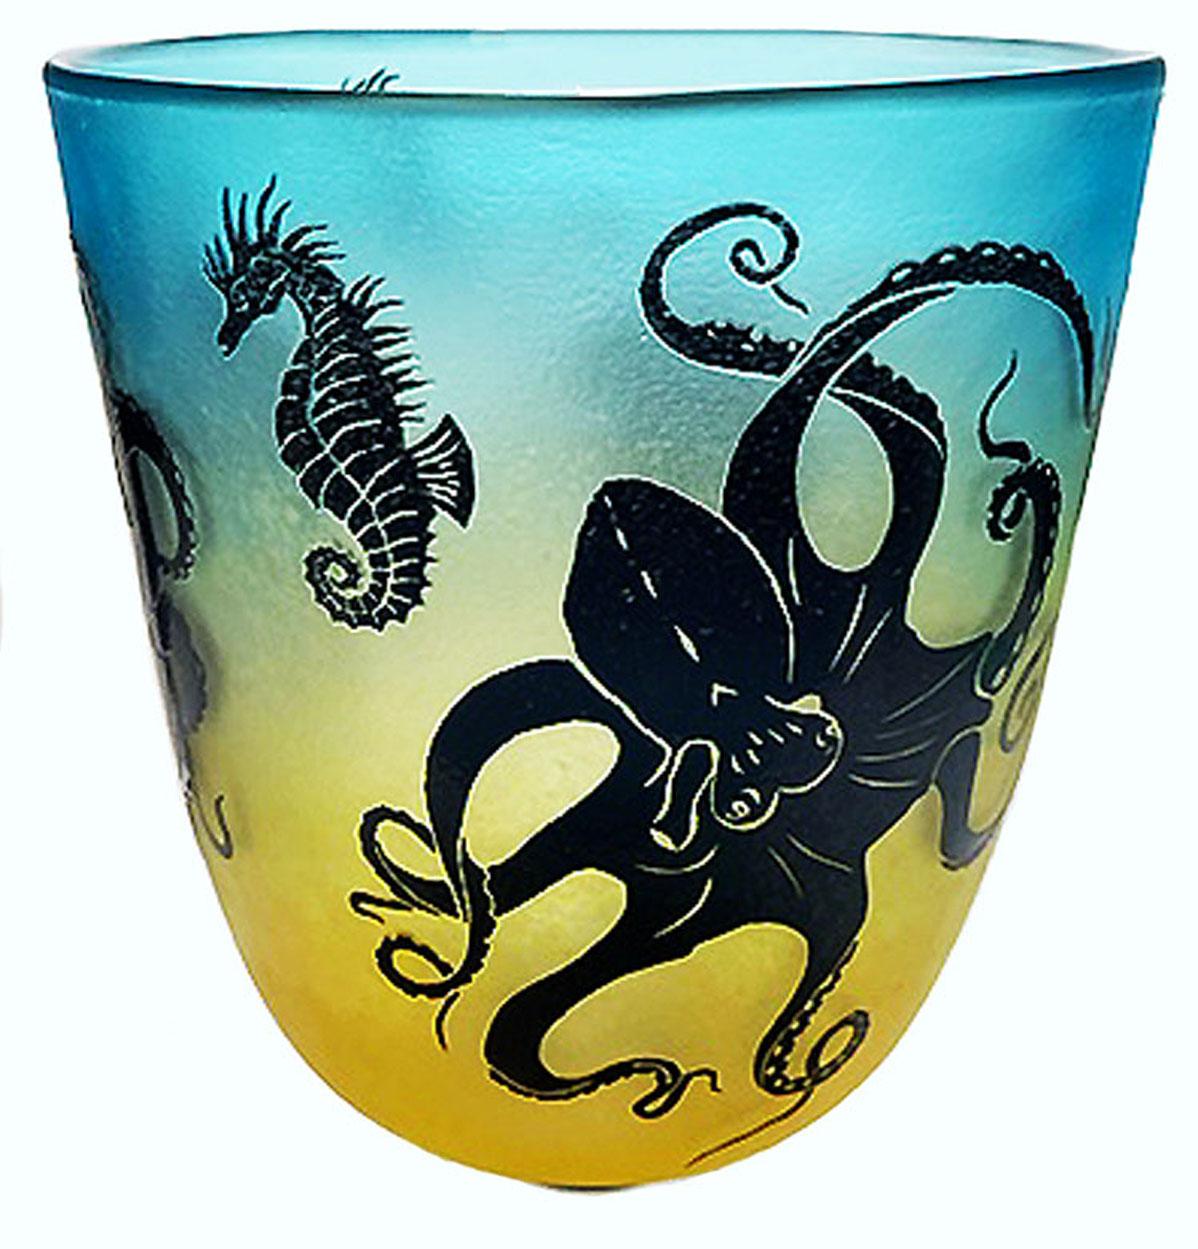 American Overlay Cameo Etched Vessel with Octopus